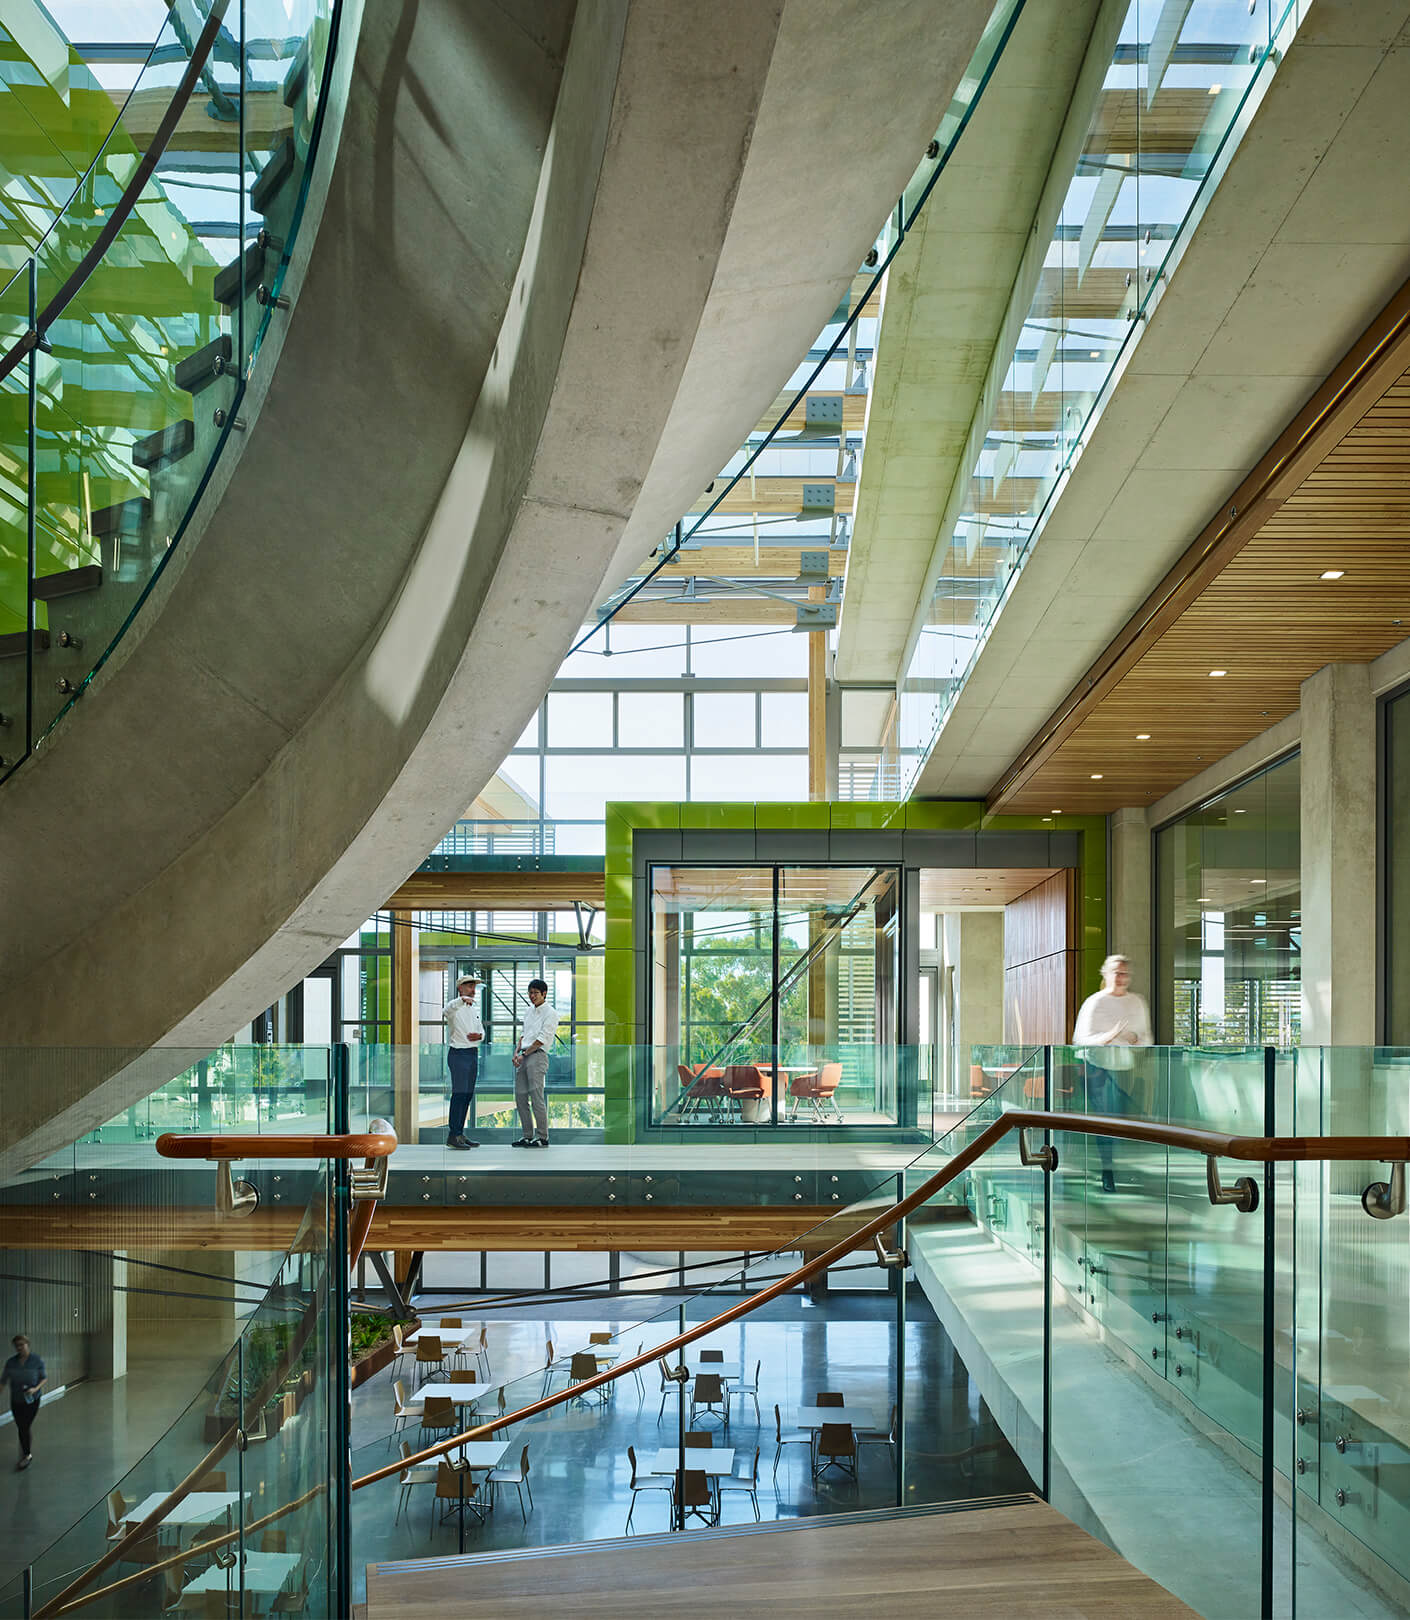 Central atrium with winding concrete stairs and green meeting pods